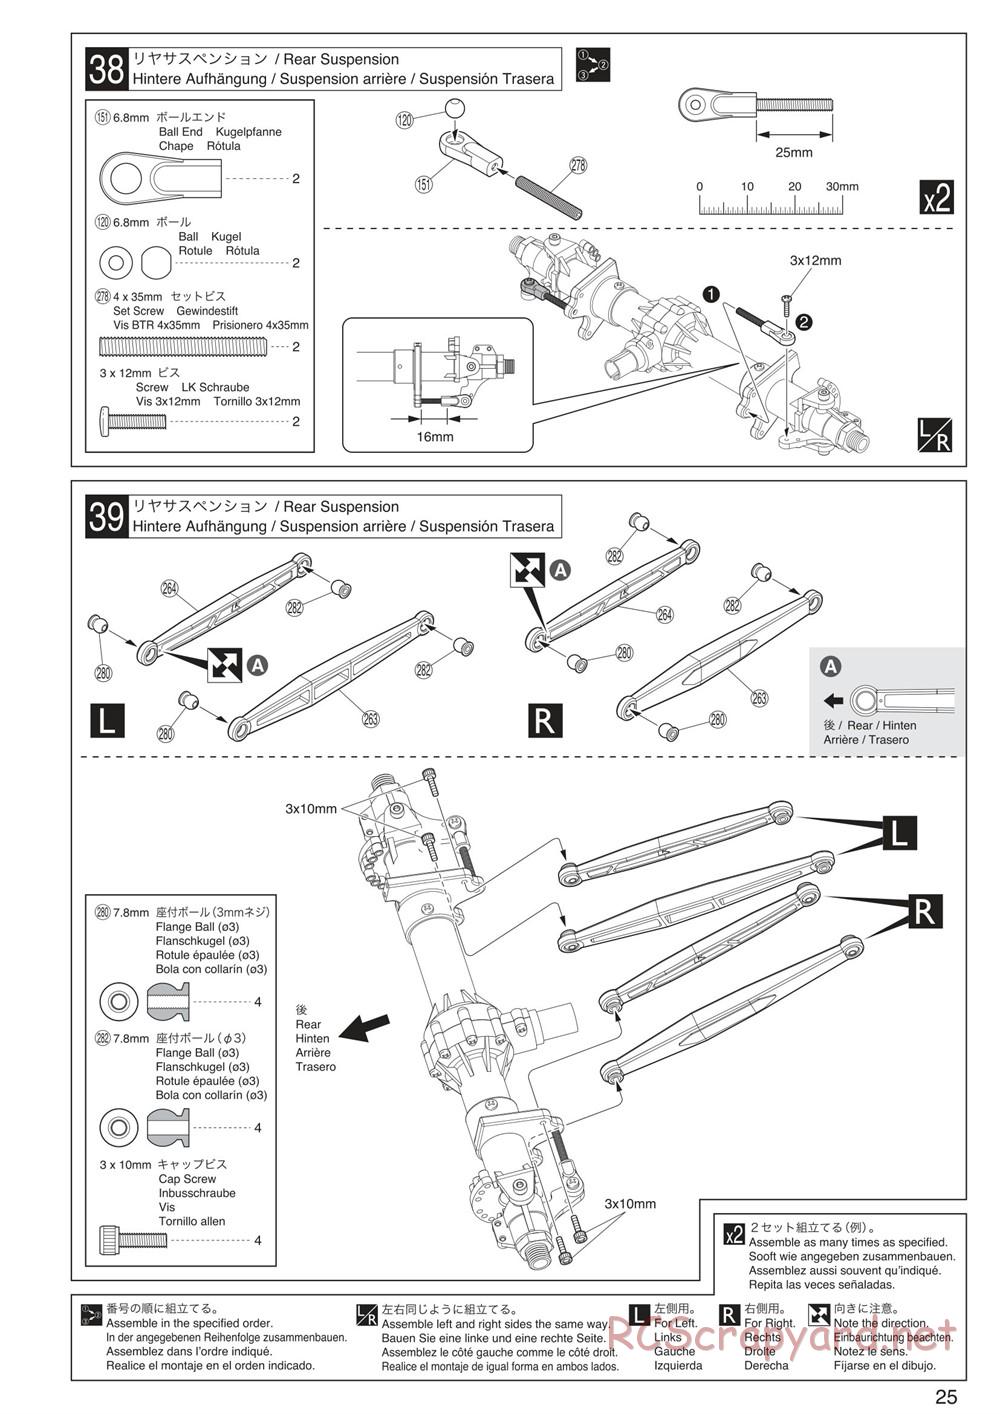 Kyosho - Mad Crusher VE - Manual - Page 25